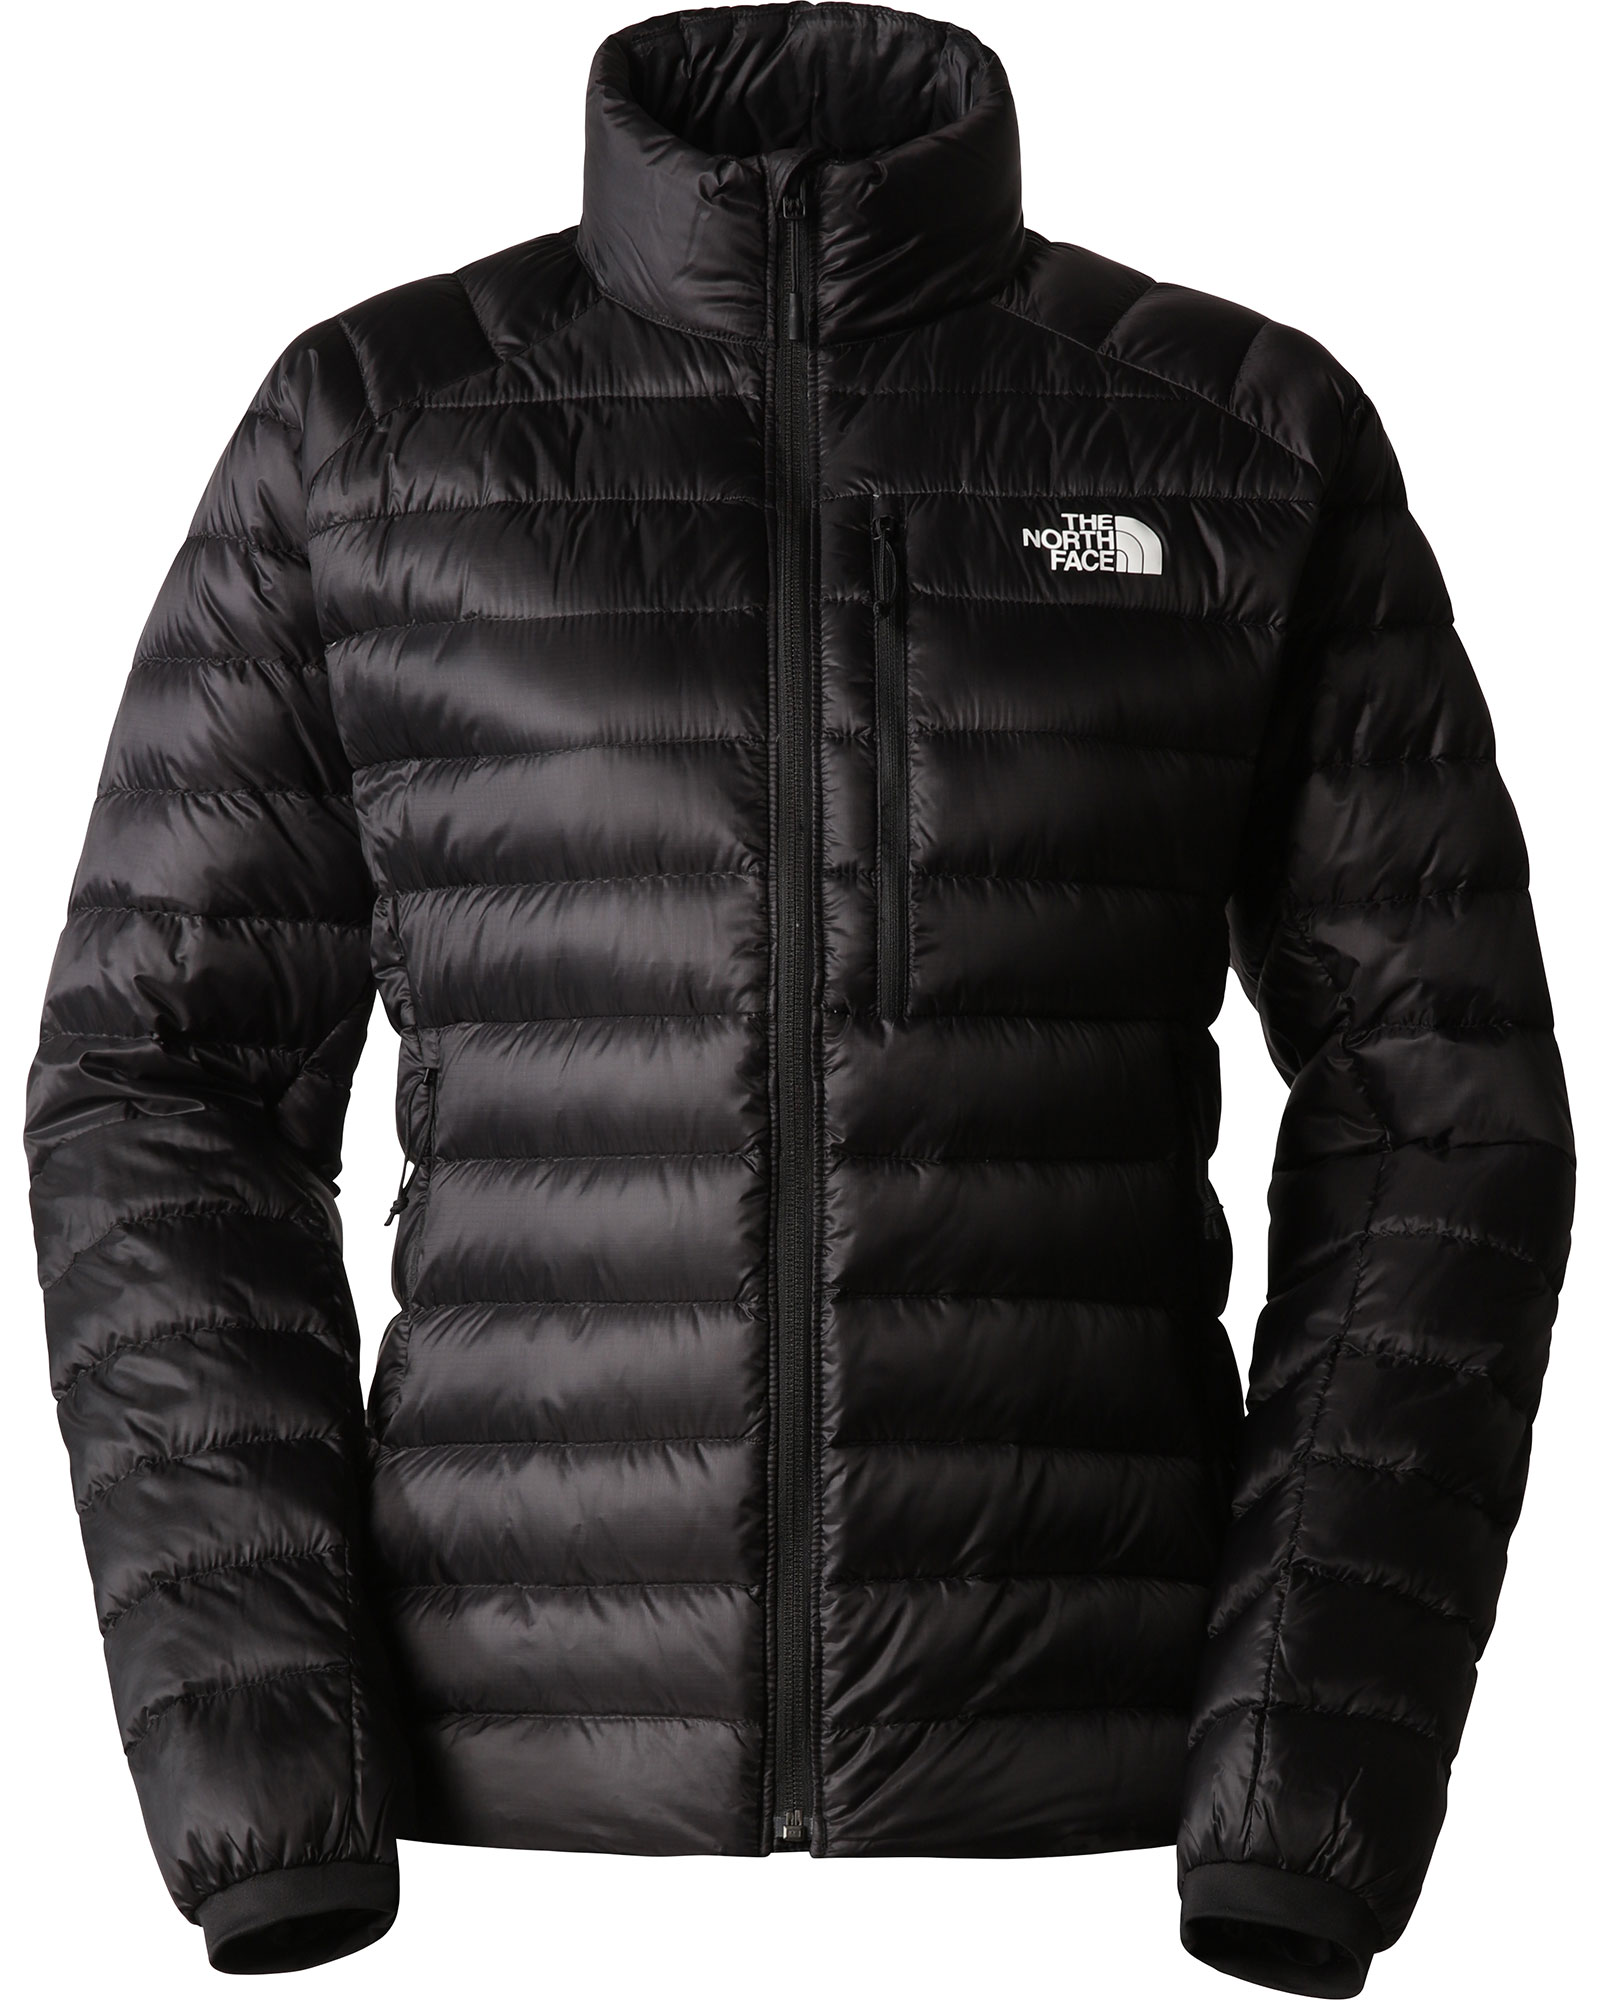 The North Face Summit Breithorn Women’s Down Jacket - TNF Black XS